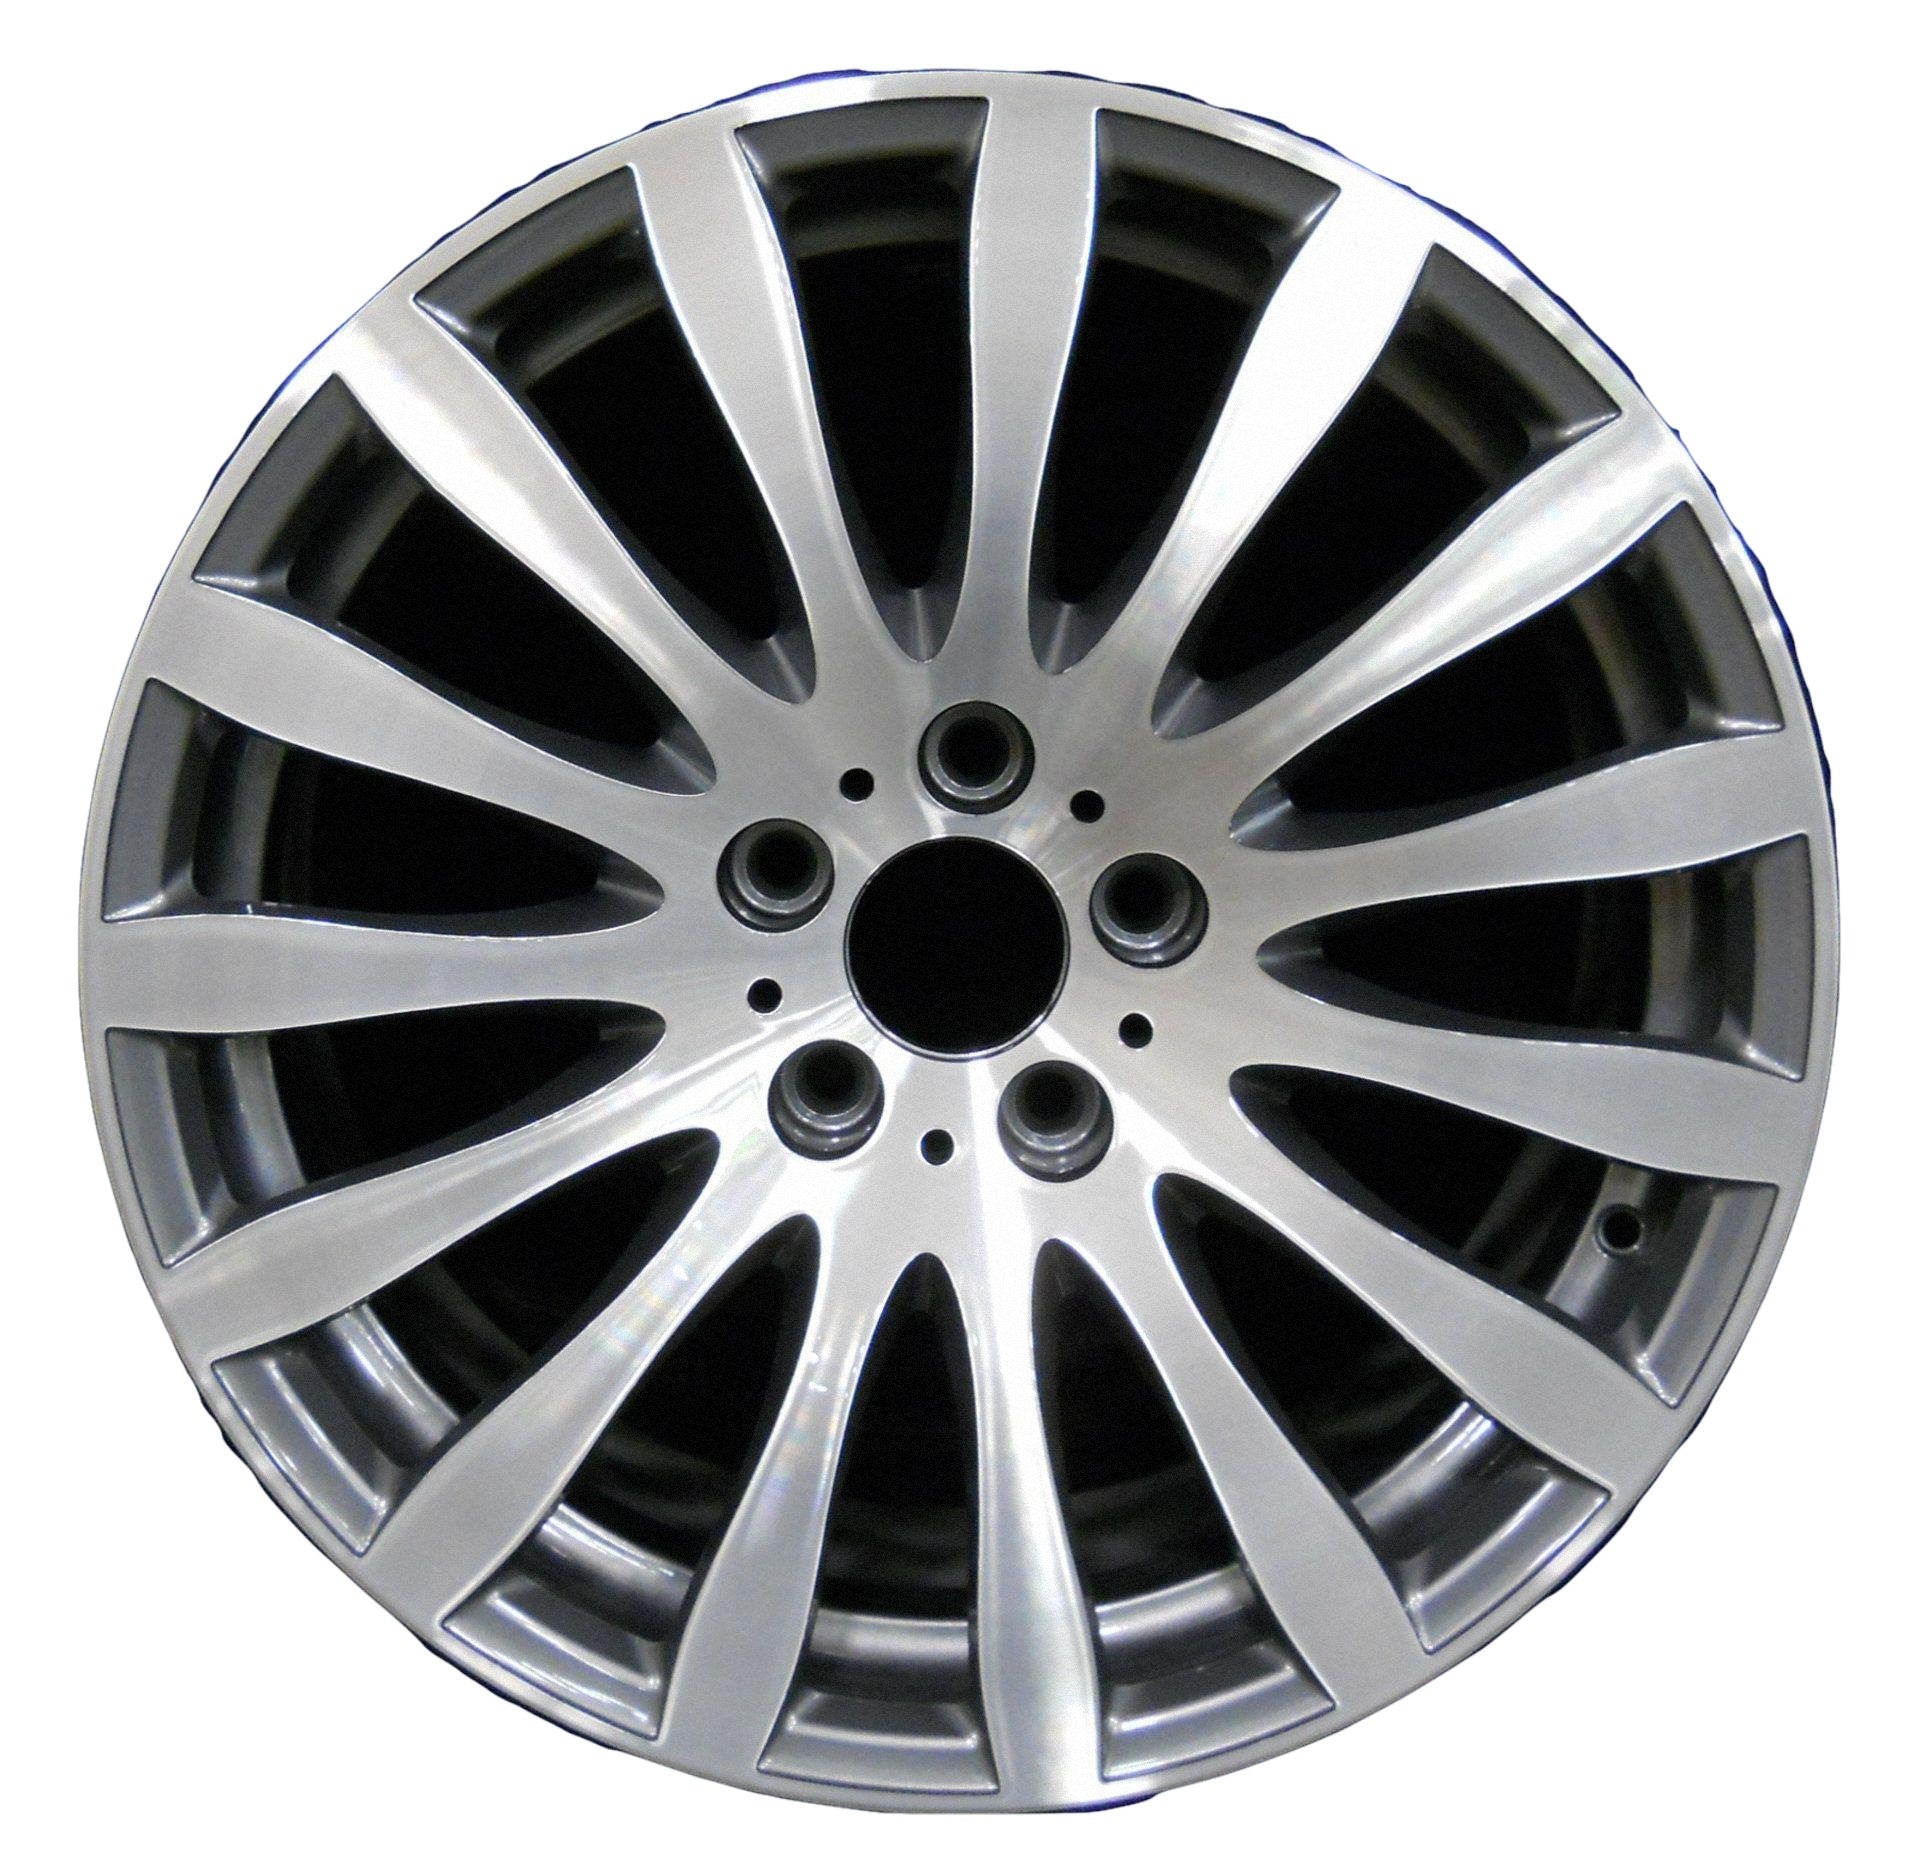 BMW 328i  2007, 2008, 2009, 2010, 2011, 2012, 2013 Factory OEM Car Wheel Size 19x8 Alloy WAO.59626FT.LC37.MABRT